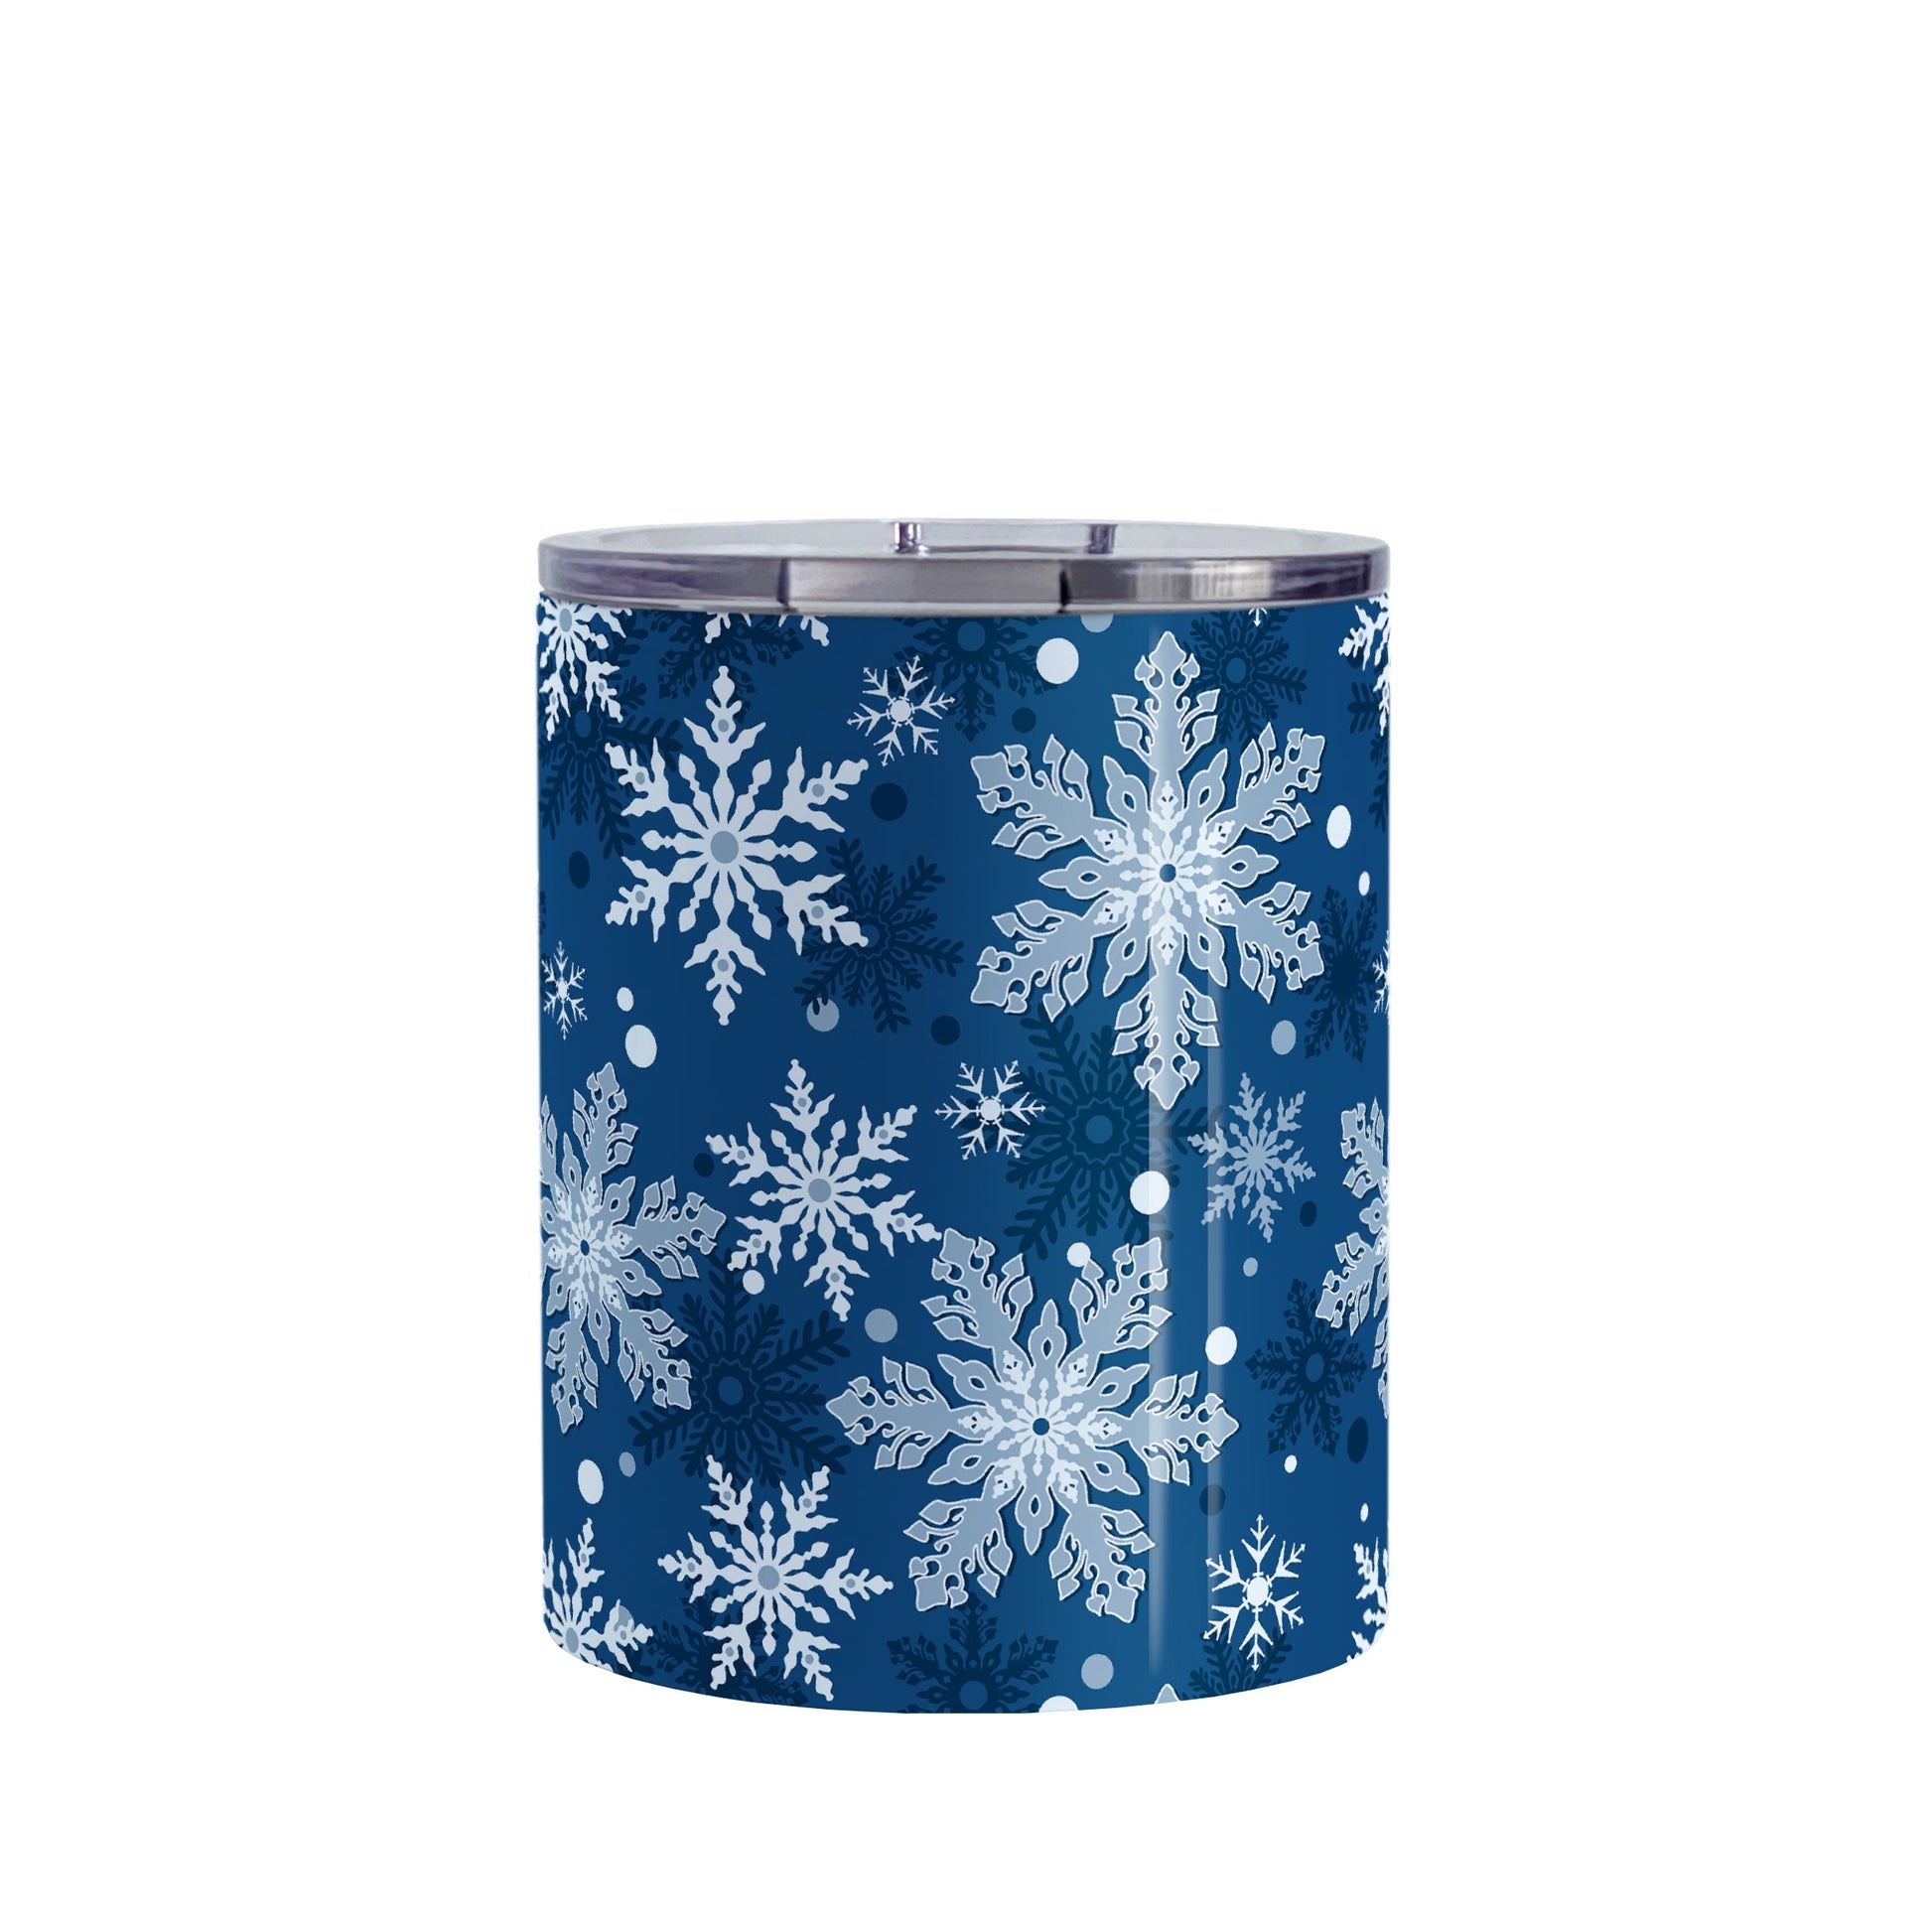 Classic Blue Snowflake Pattern Winter Tumbler Cup (10oz, stainless steel insulated) at Amy's Coffee Mugs